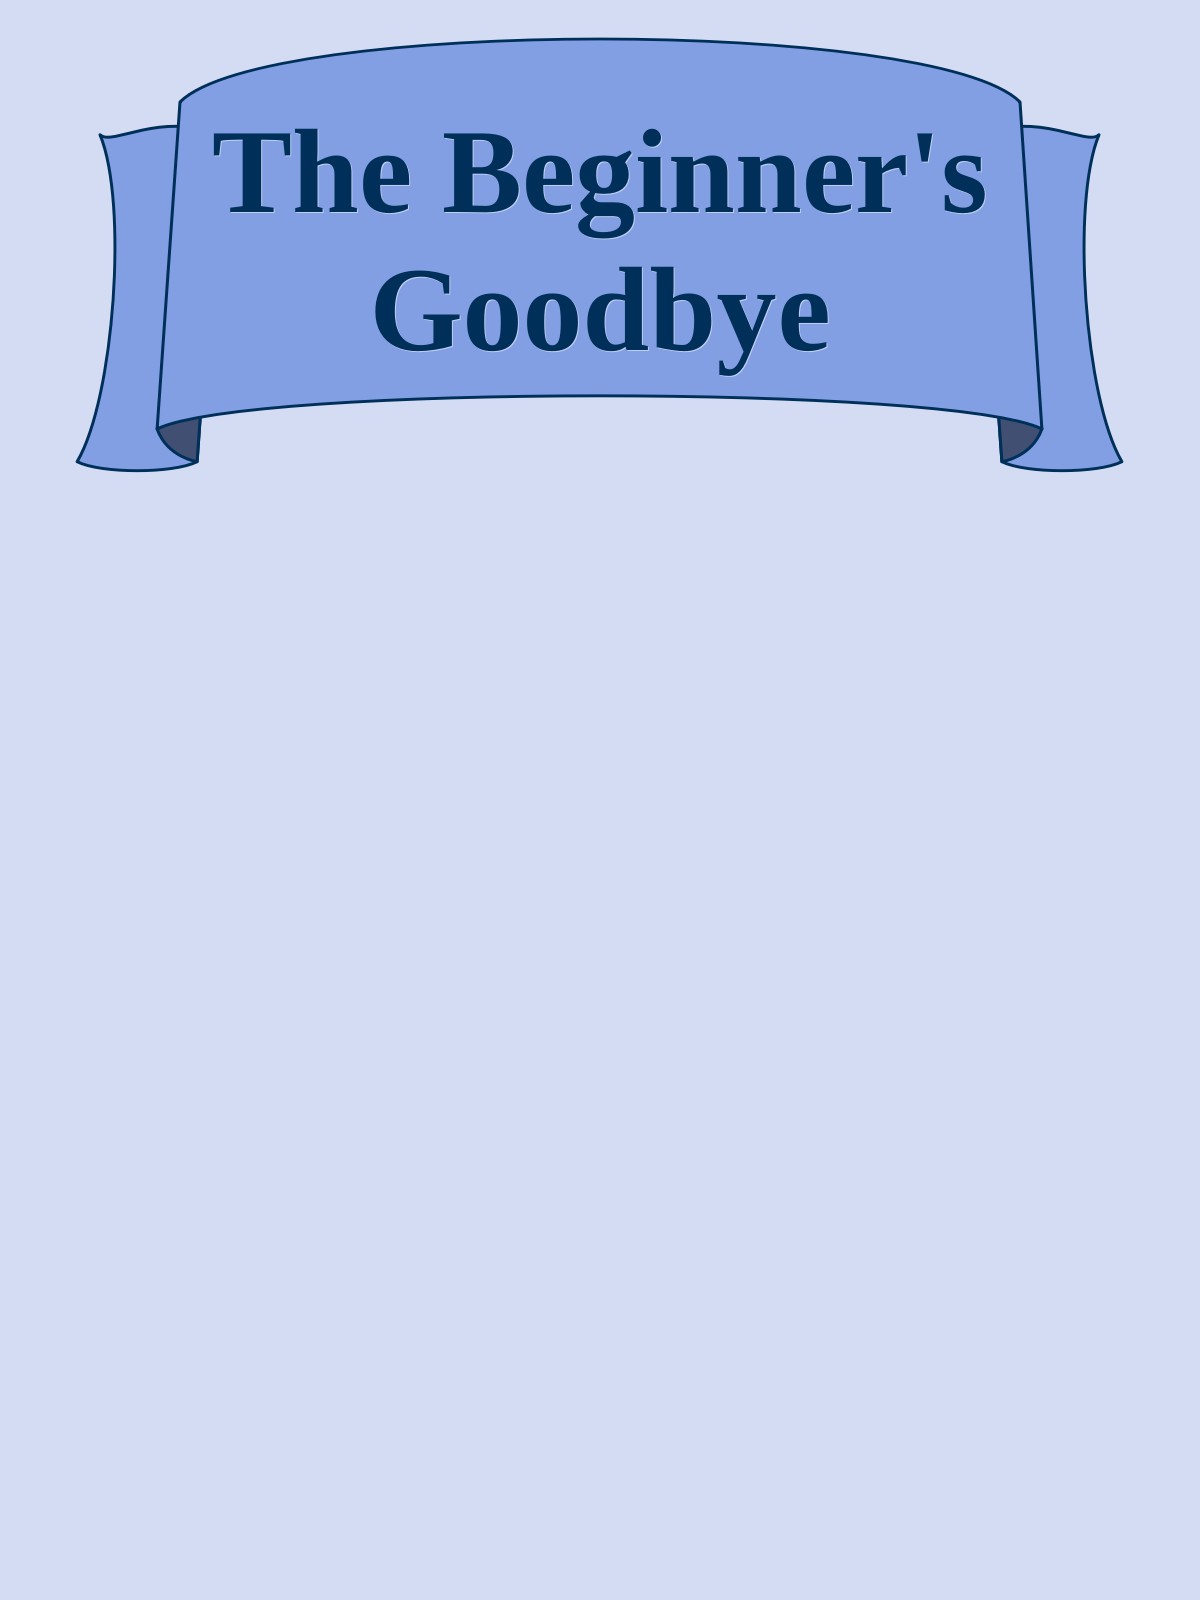 The Beginner's Goodbye by Unknown